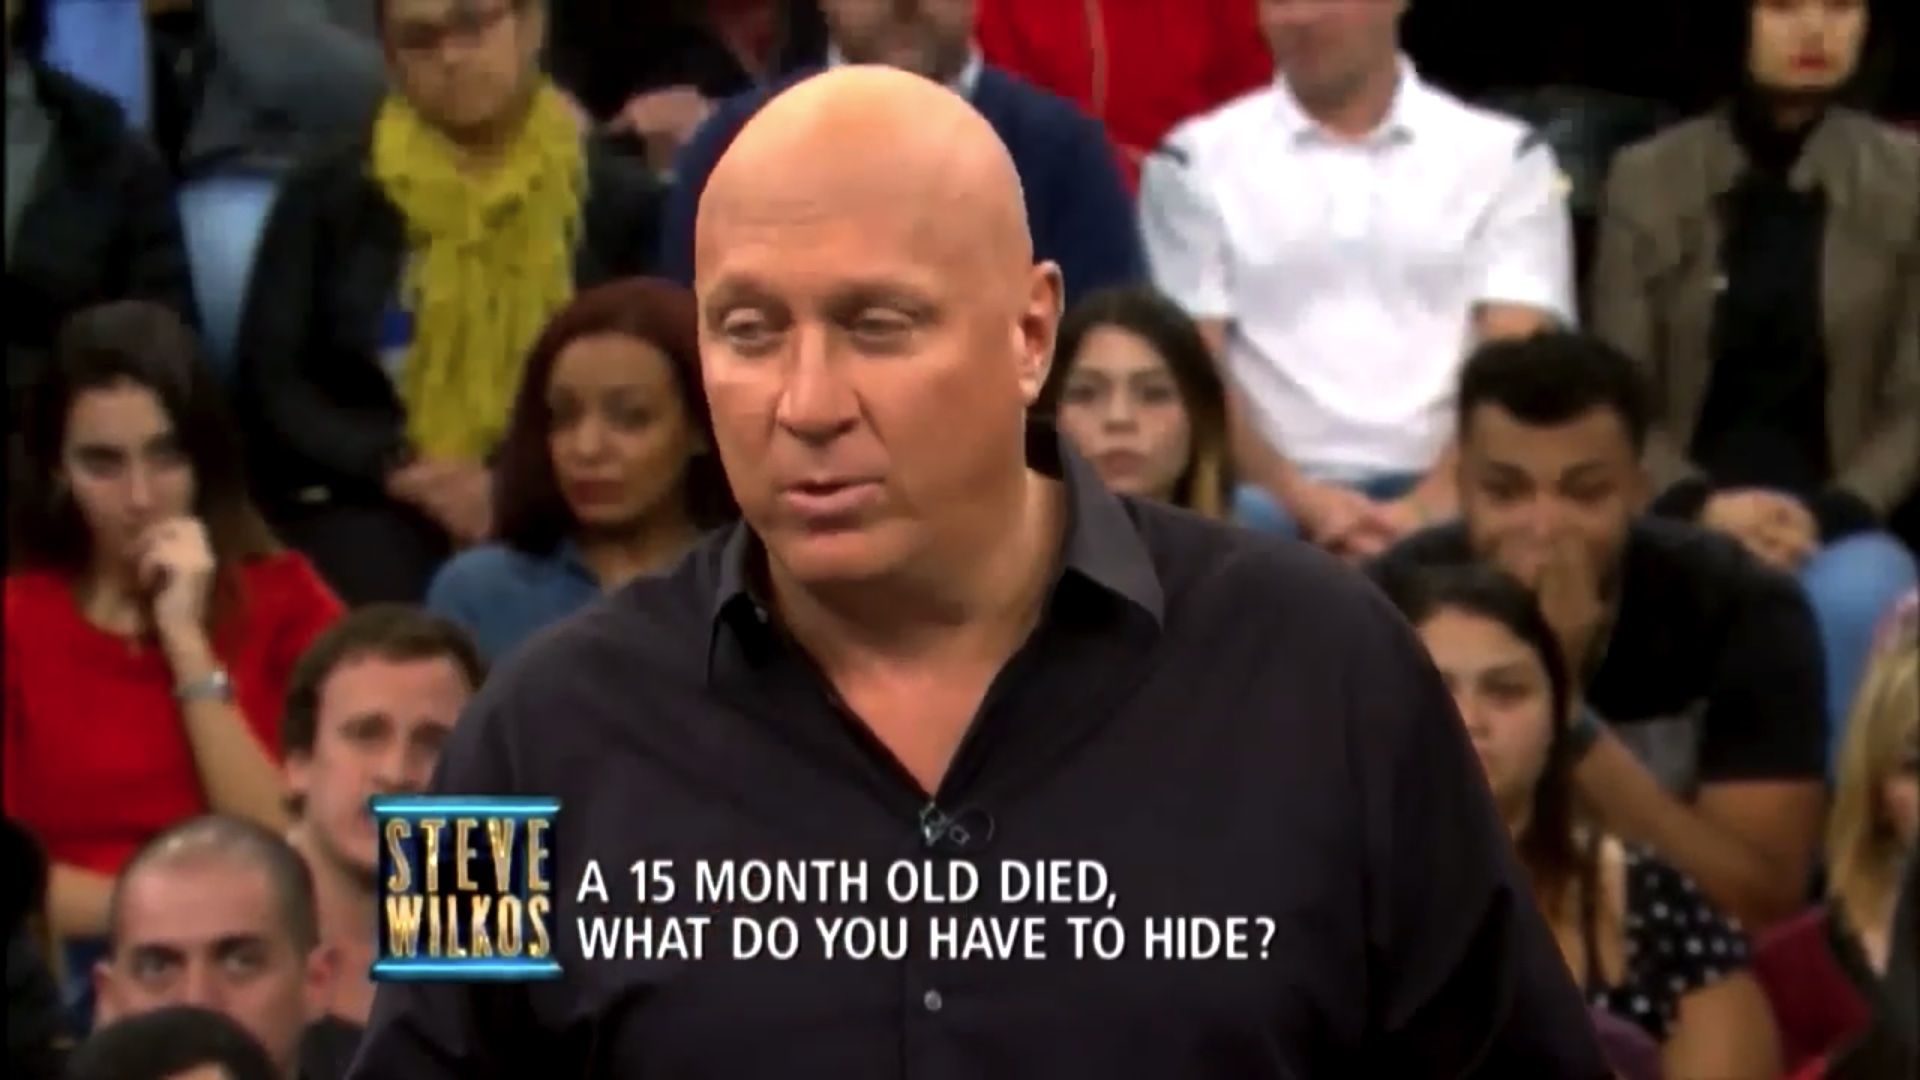 Steve Wilkos Show Guest Who Passed Polygraph Later Confessed to